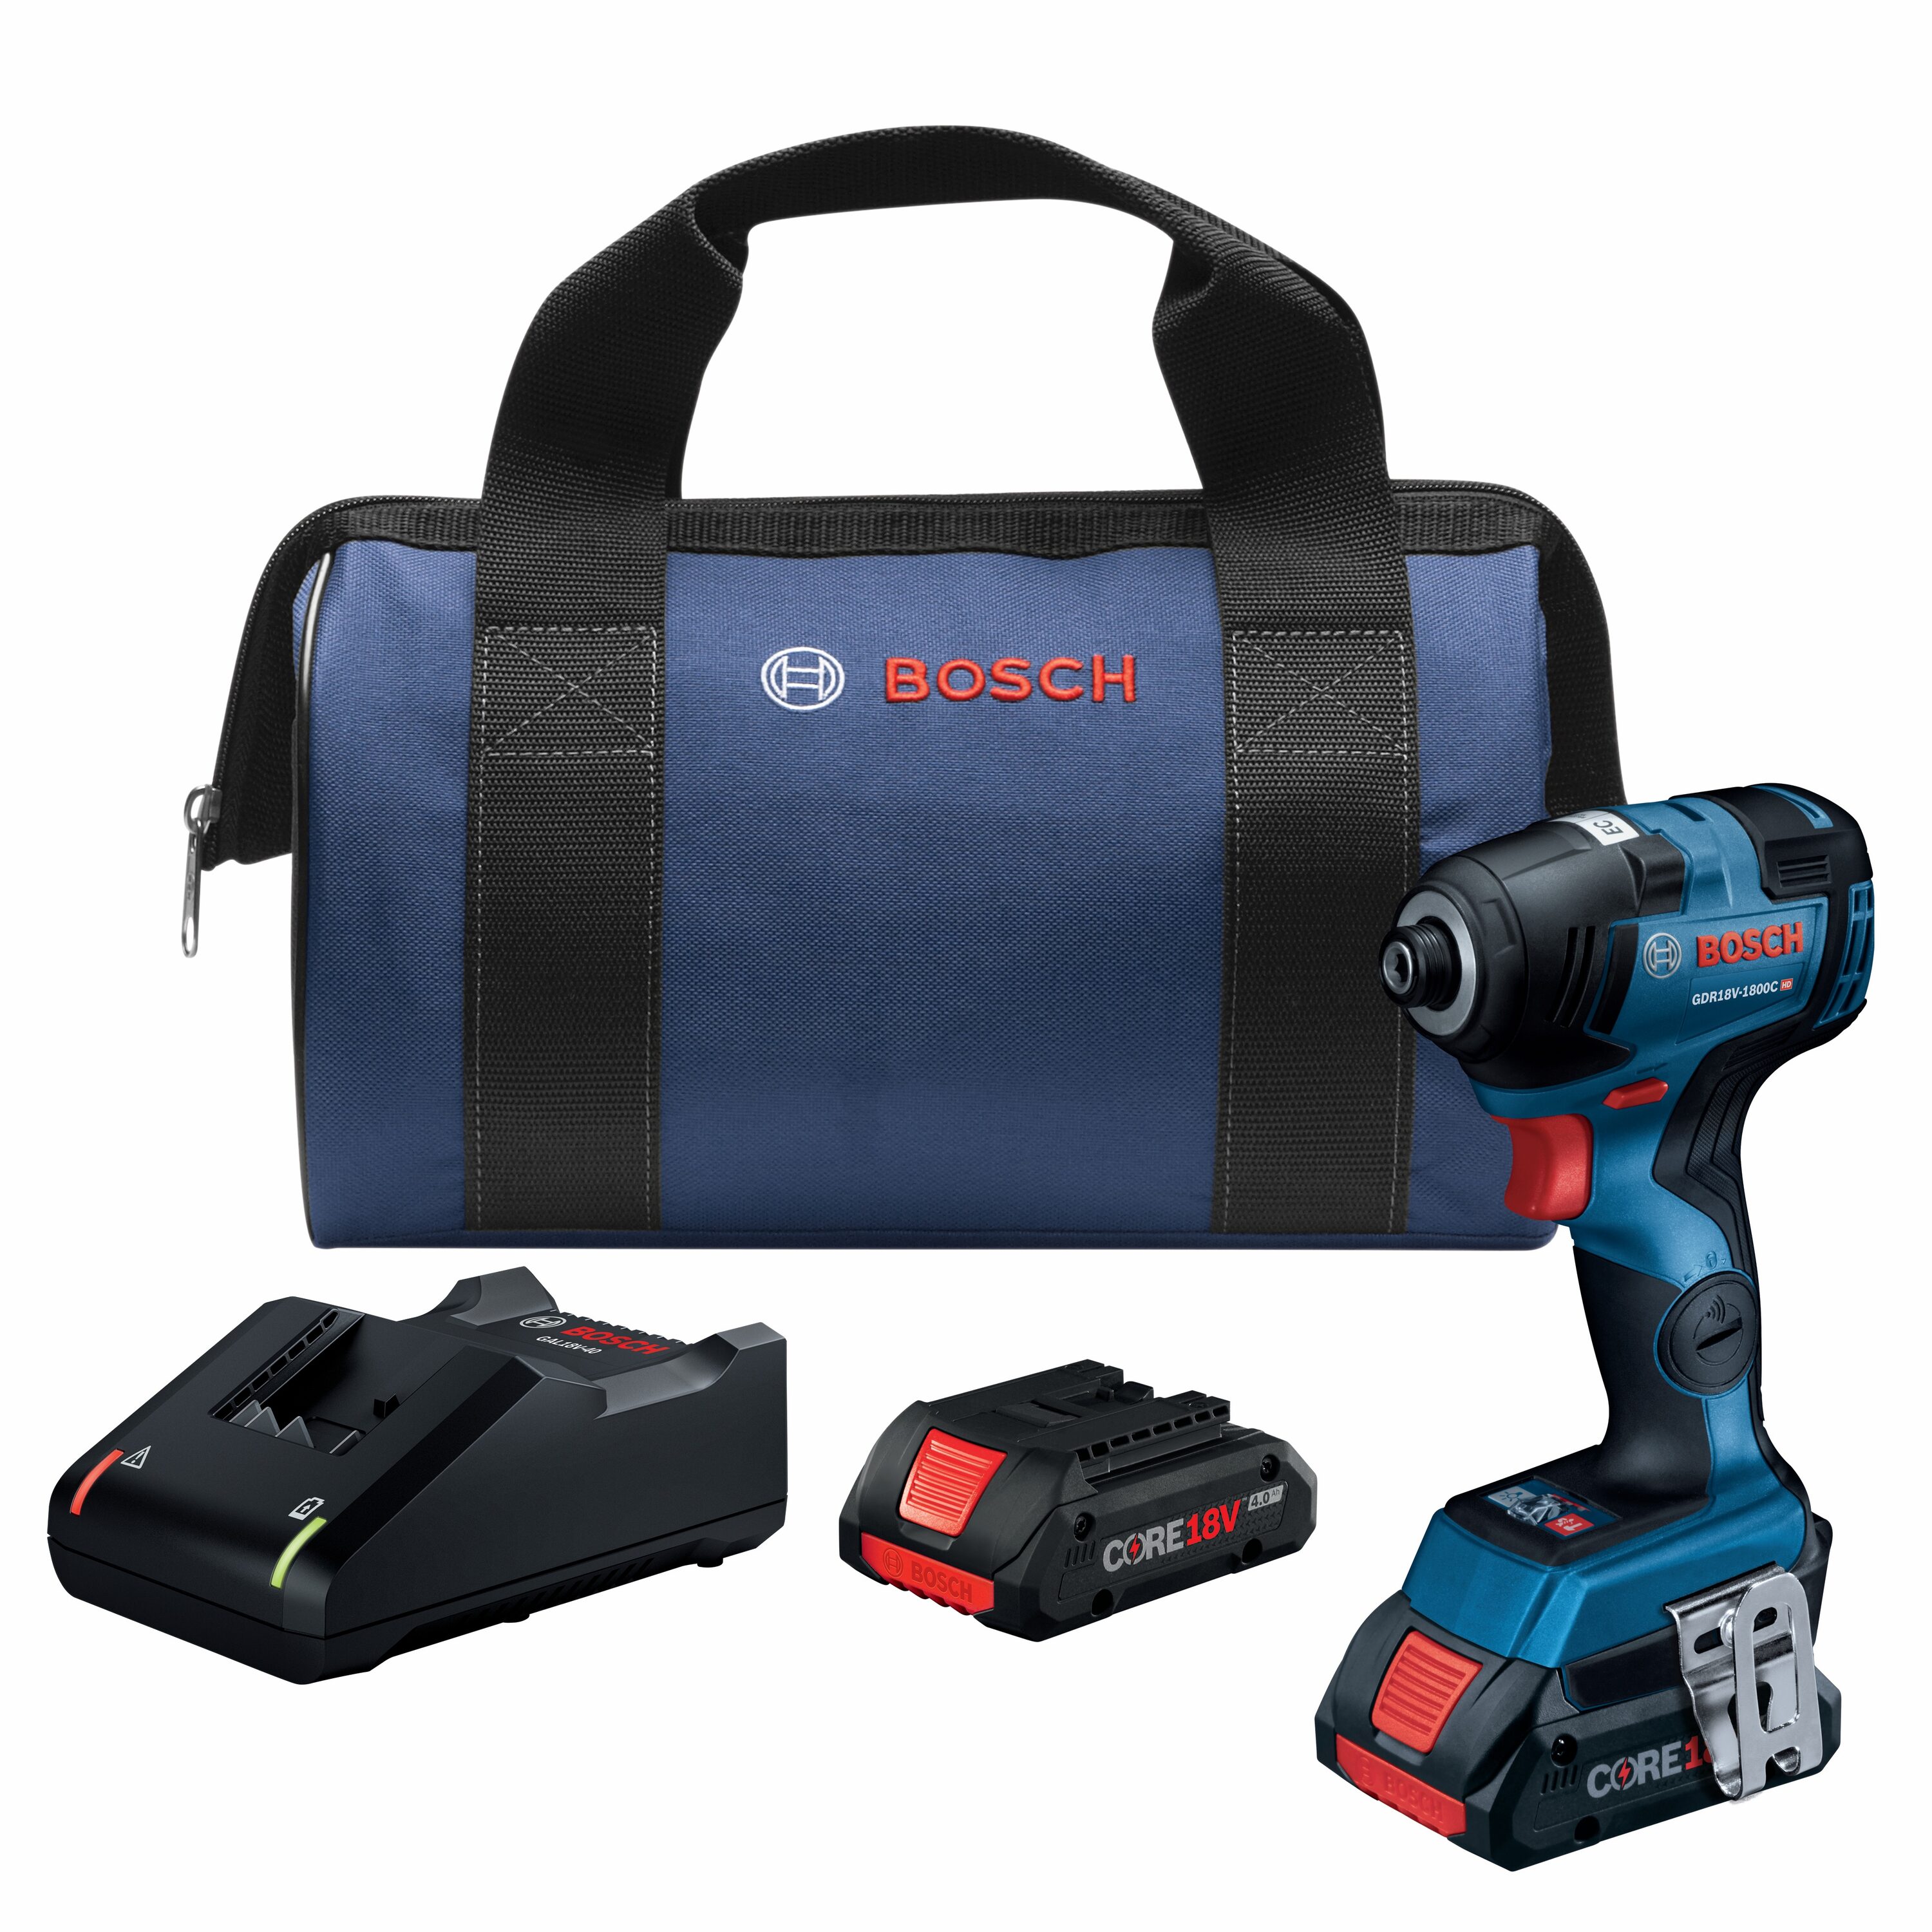 BOSCH Bare-Tool 25618B 18-Volt Lithium-Ion 1/4-Inch Hex Impact Driver,Blue